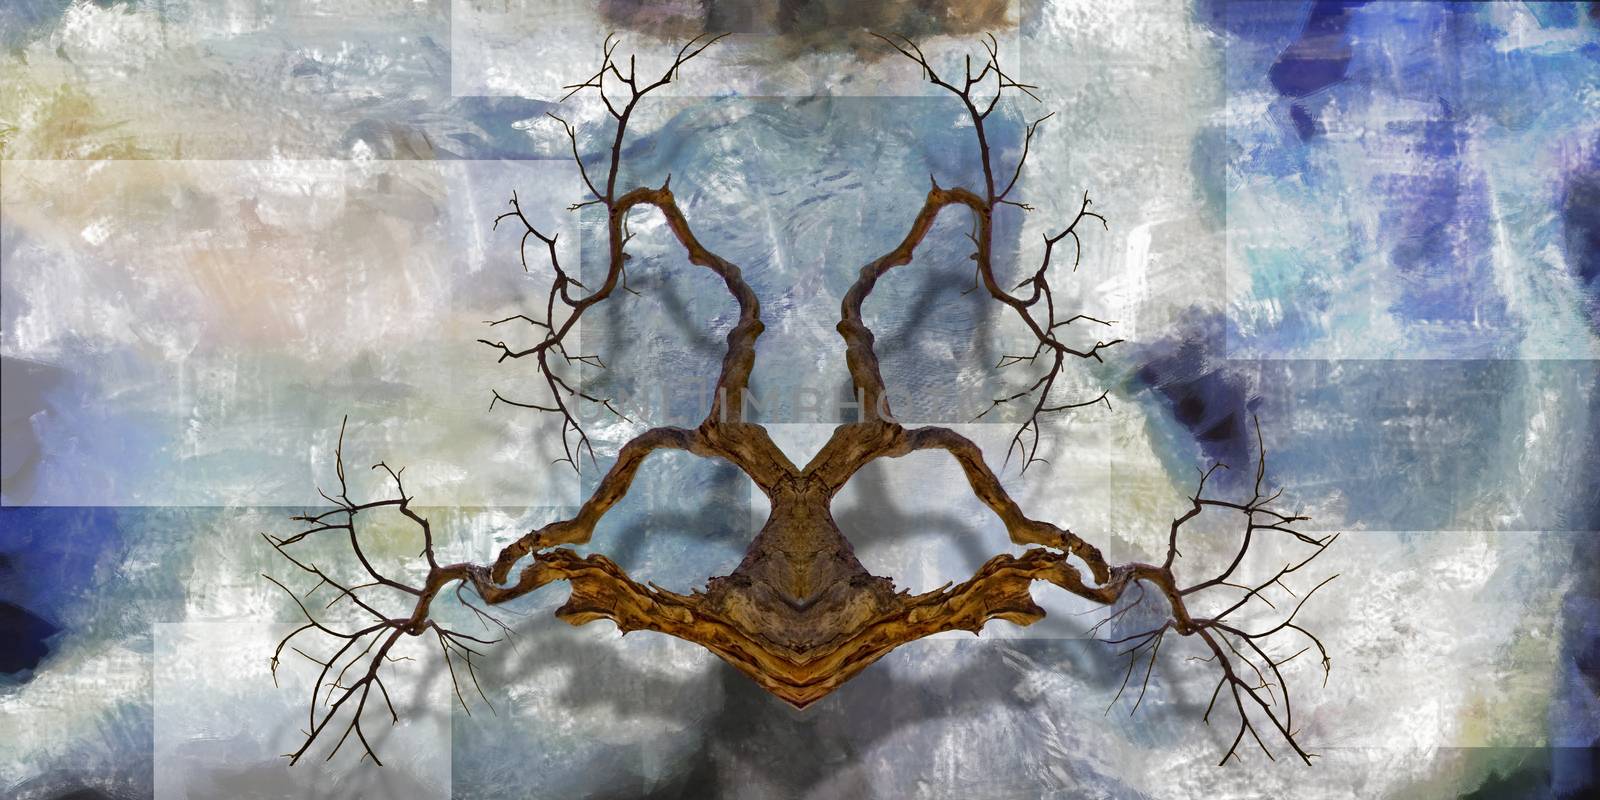 Muted Painting. Surreal tree branches